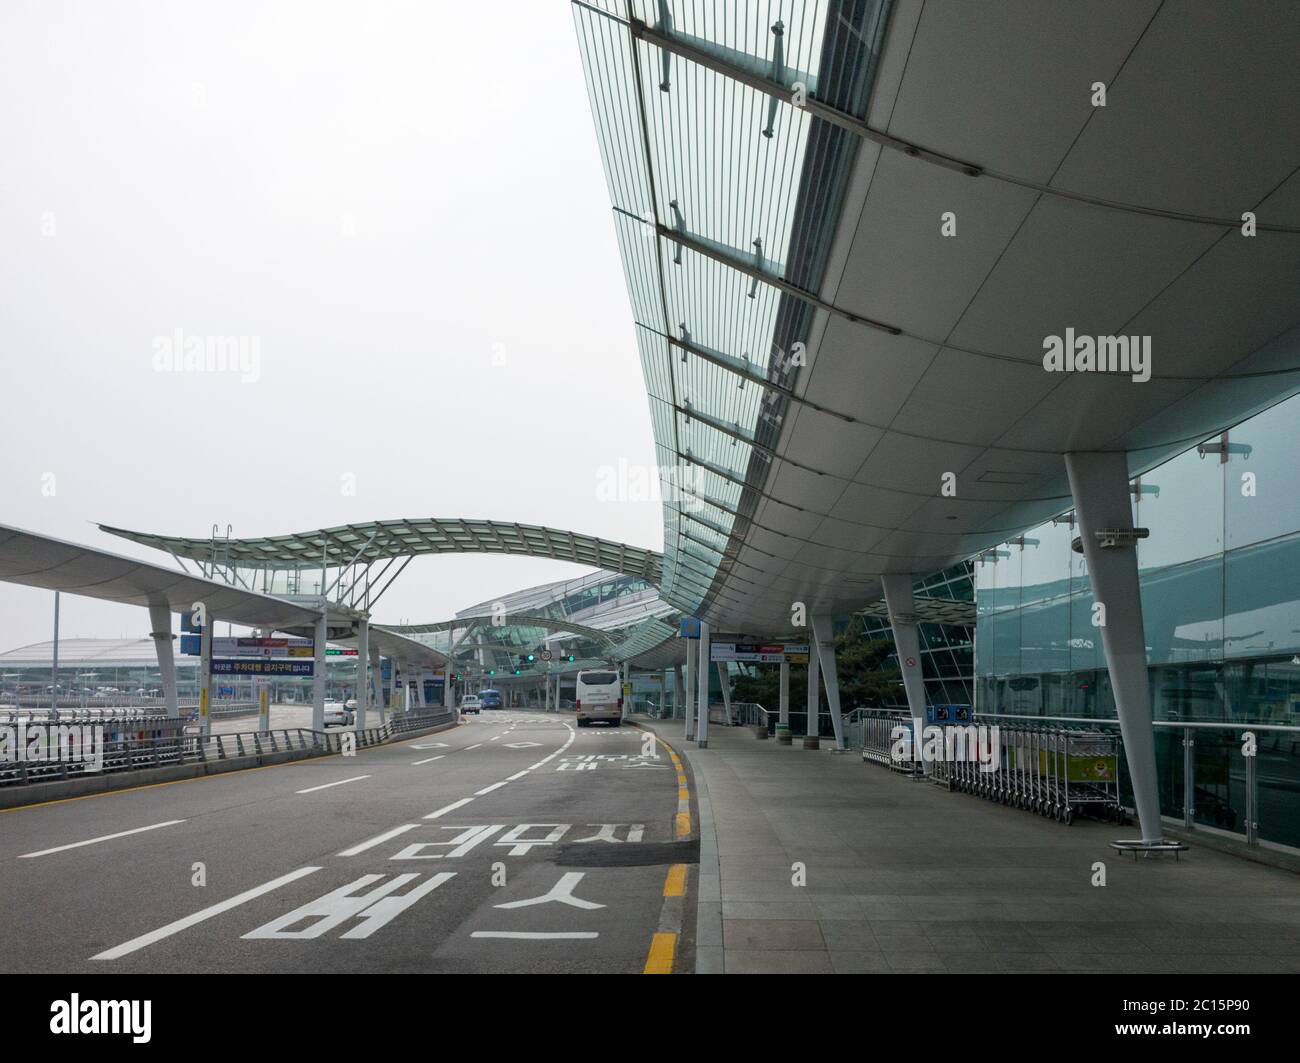 Incheon, South Korea - No people at Seoul Incheon International Airport in Coronavirus pandemic outbreak crisis. COVID-19 hits airline industry. Stock Photo